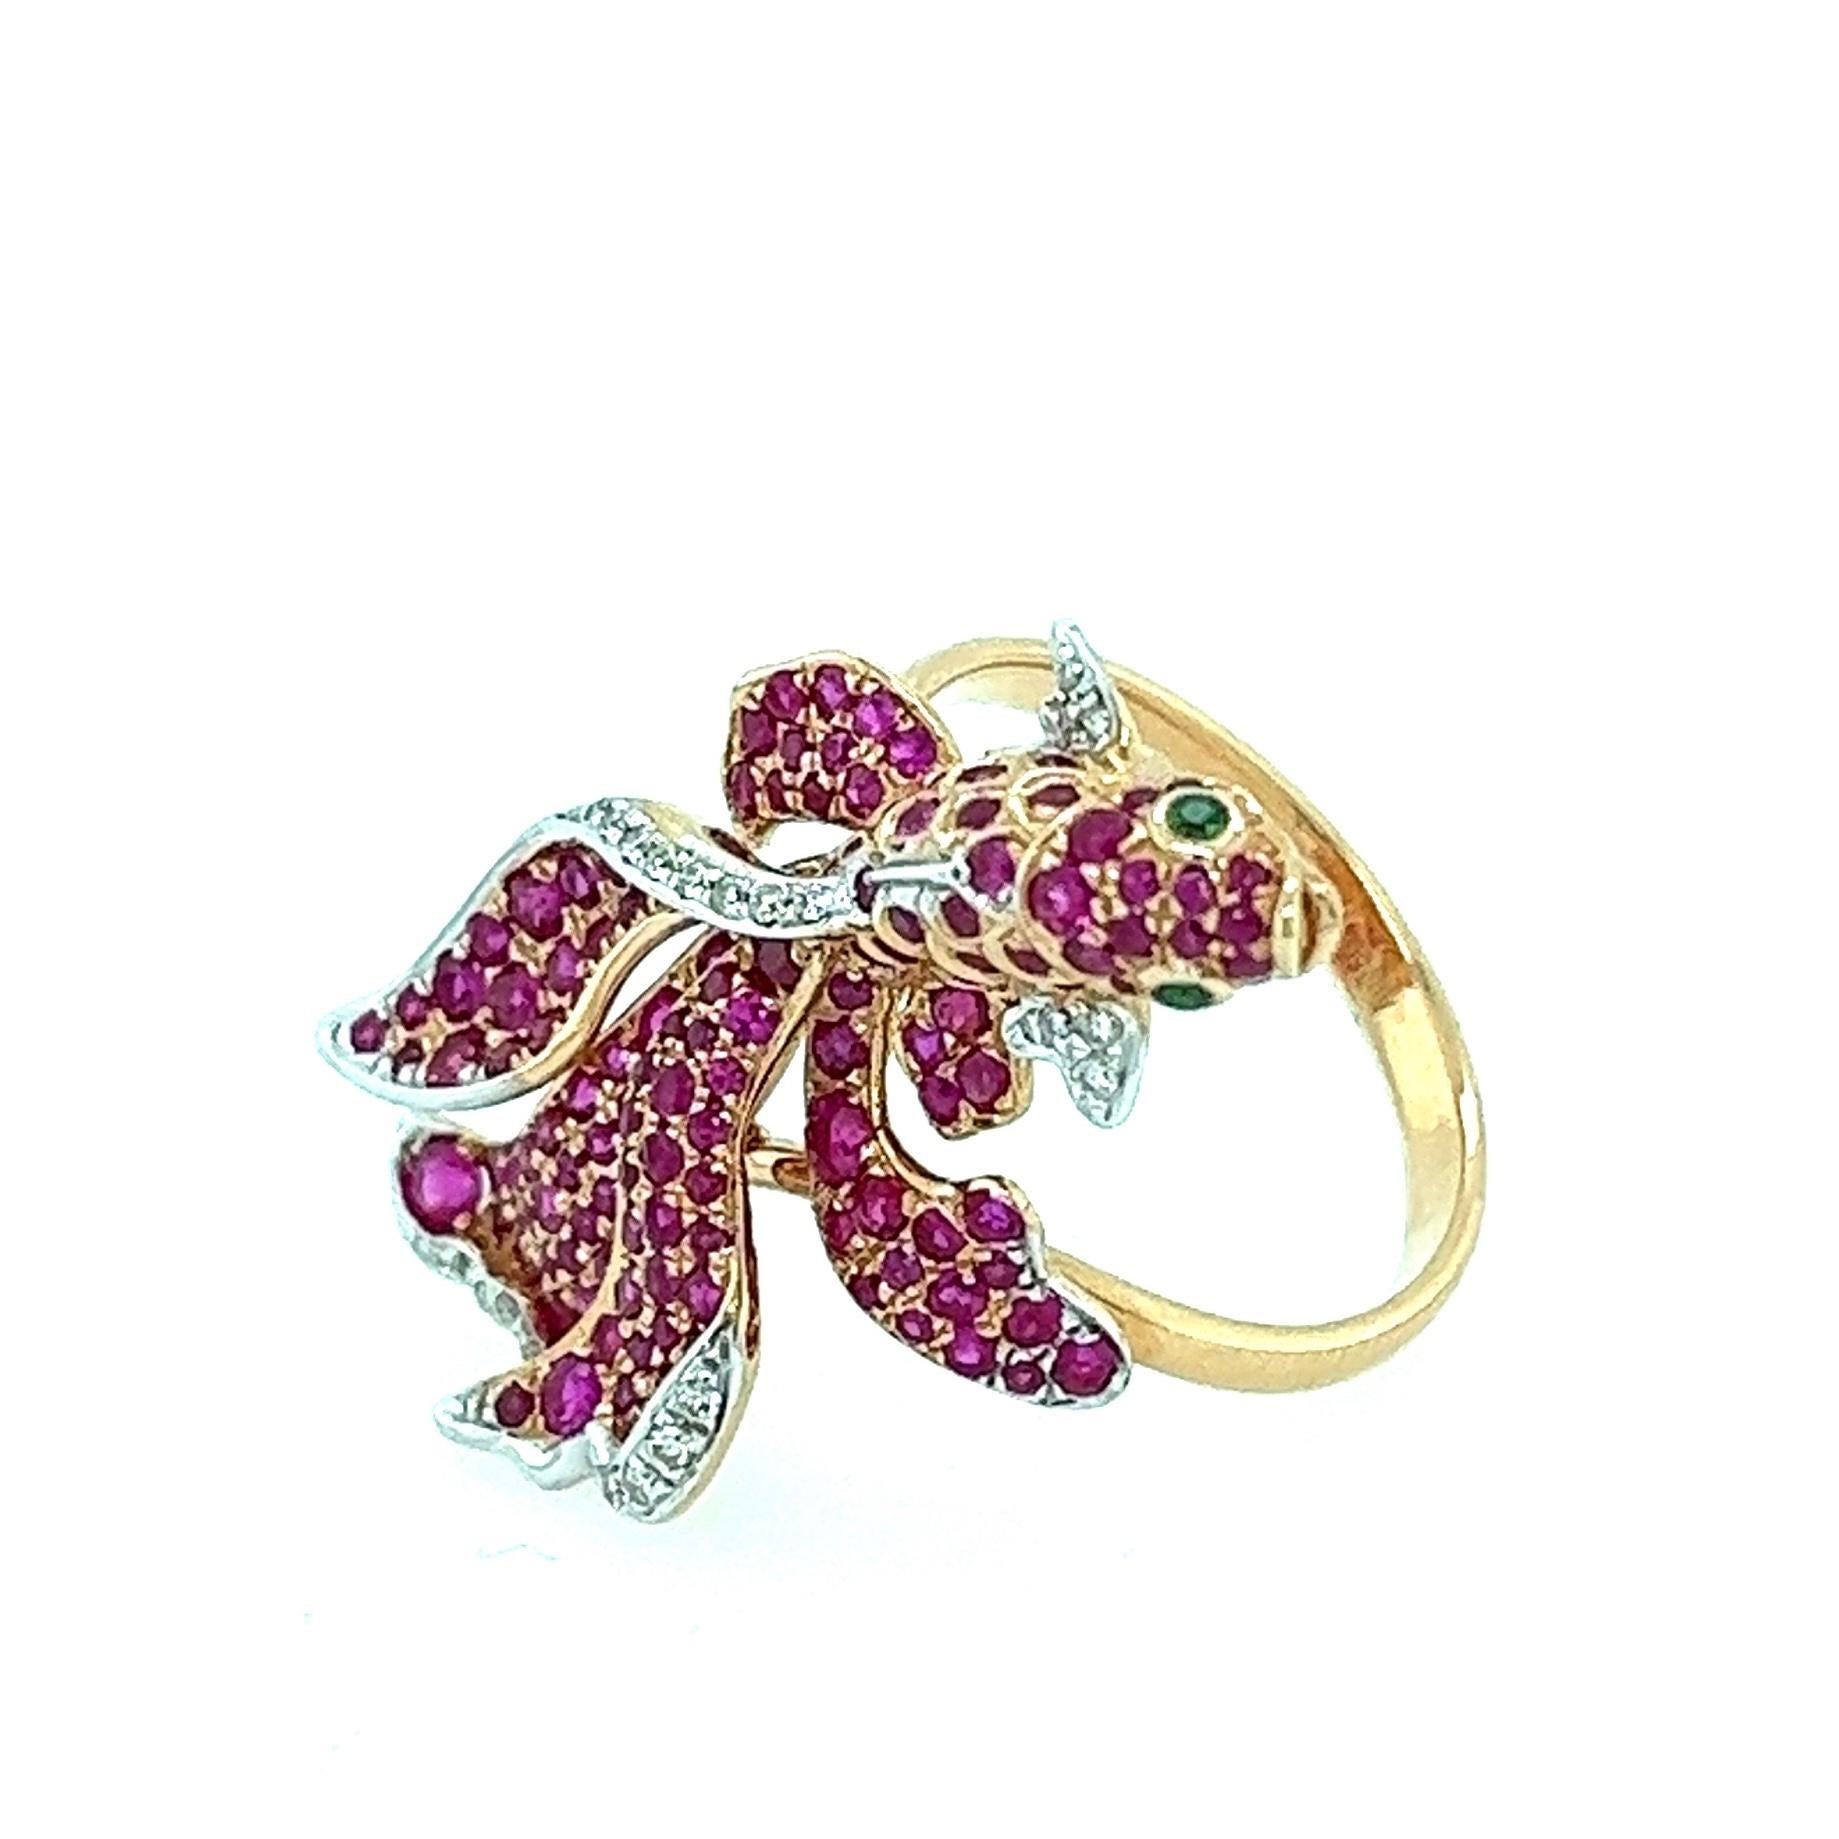 18K Rose Gold Ruby Blessing Goldfish Ring with Diamonds

24 Diamonds - 0.09 CT
2 Green Garnets - 0.03 CT
137 Rubies - 1.44 CT
18K Rose Gold - 5.49 GM

This is a vibrant red goldfish ring adorned with rubies, symbolizing grace and elegance. Inspired